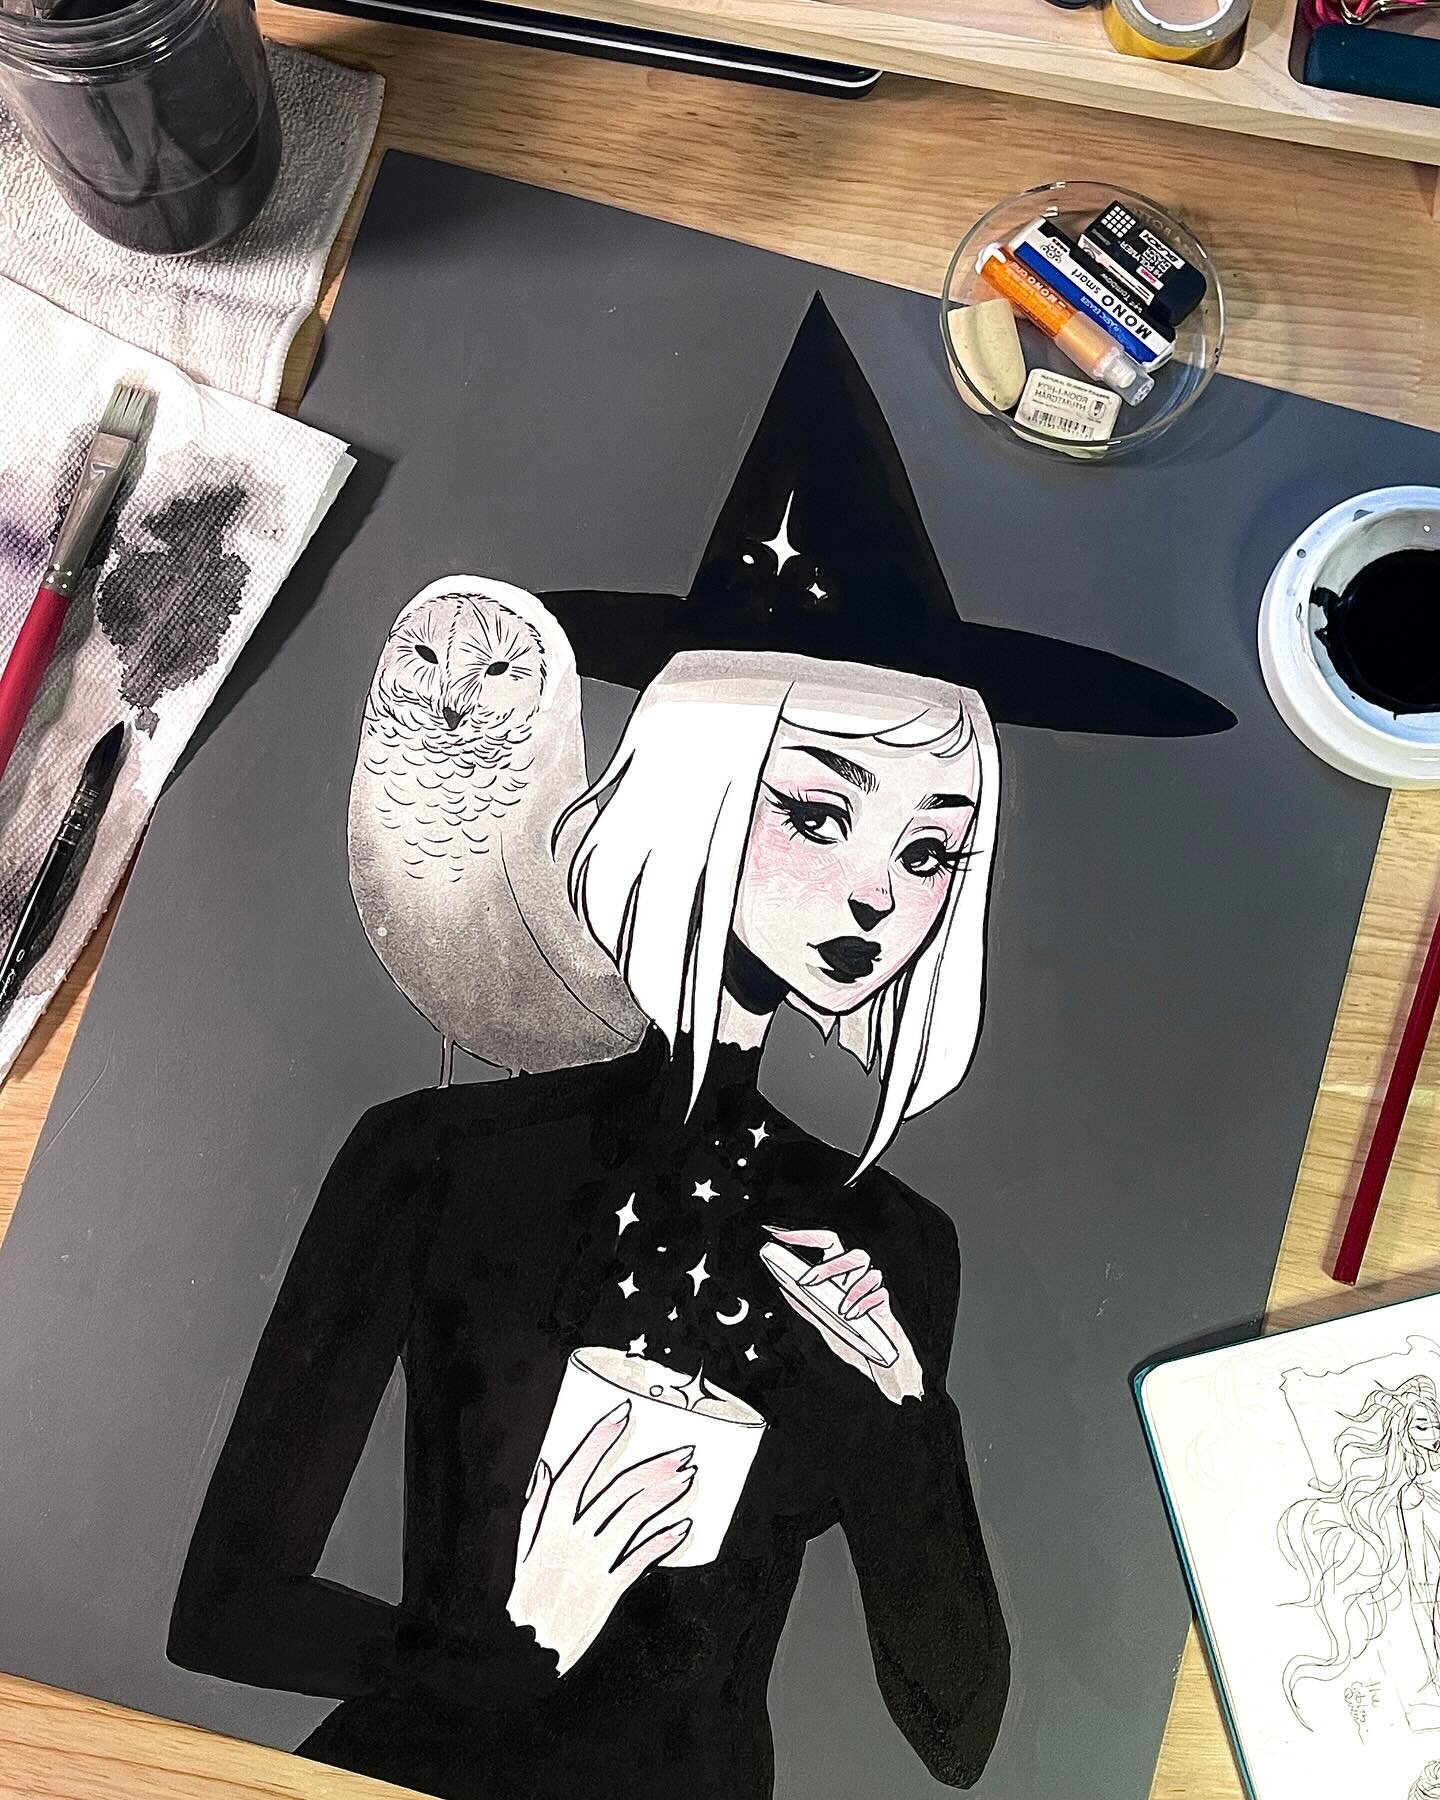 Willow🕯️🍂
ink and acrylic on 16x20 illustration board✨Happy halloween!🎃
.
#inktober #halloween #witch #witchcraft #candle #candlemaking